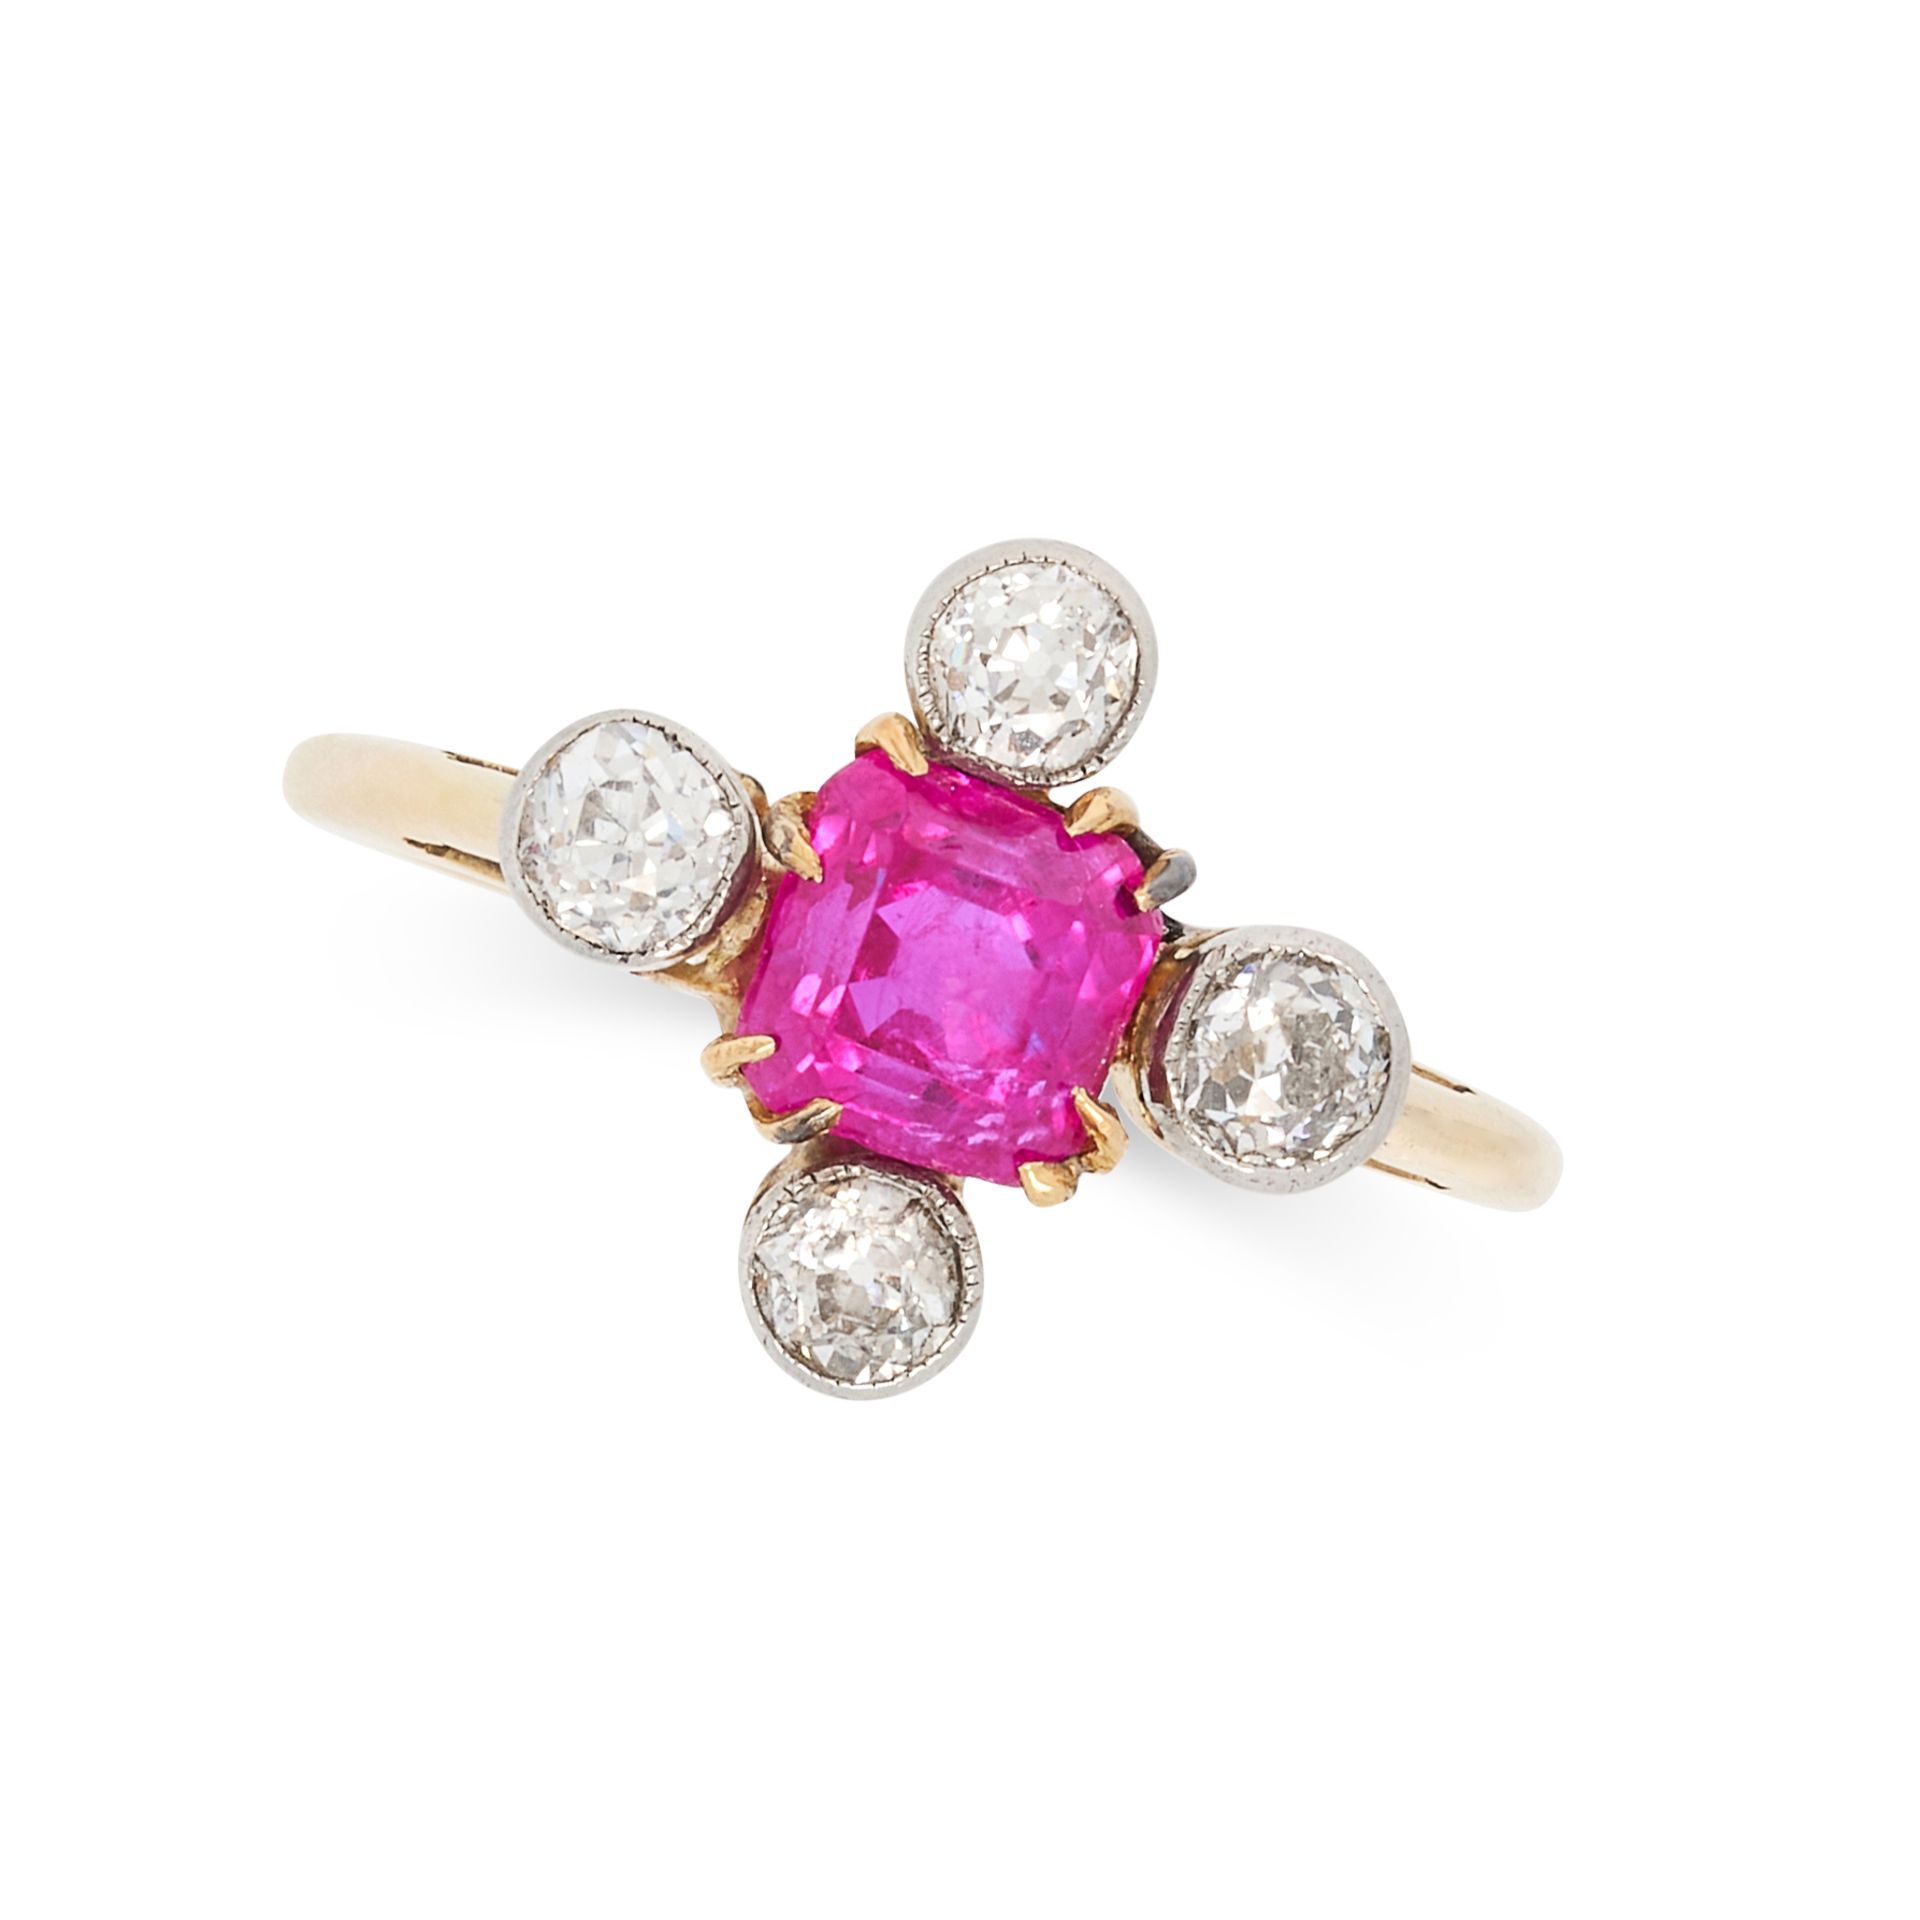 AN ANTIQUE BURMA NO HEAT PINK SAPPHIRE AND DIAMOND RING in 18ct yellow gold, set with an emerald cut